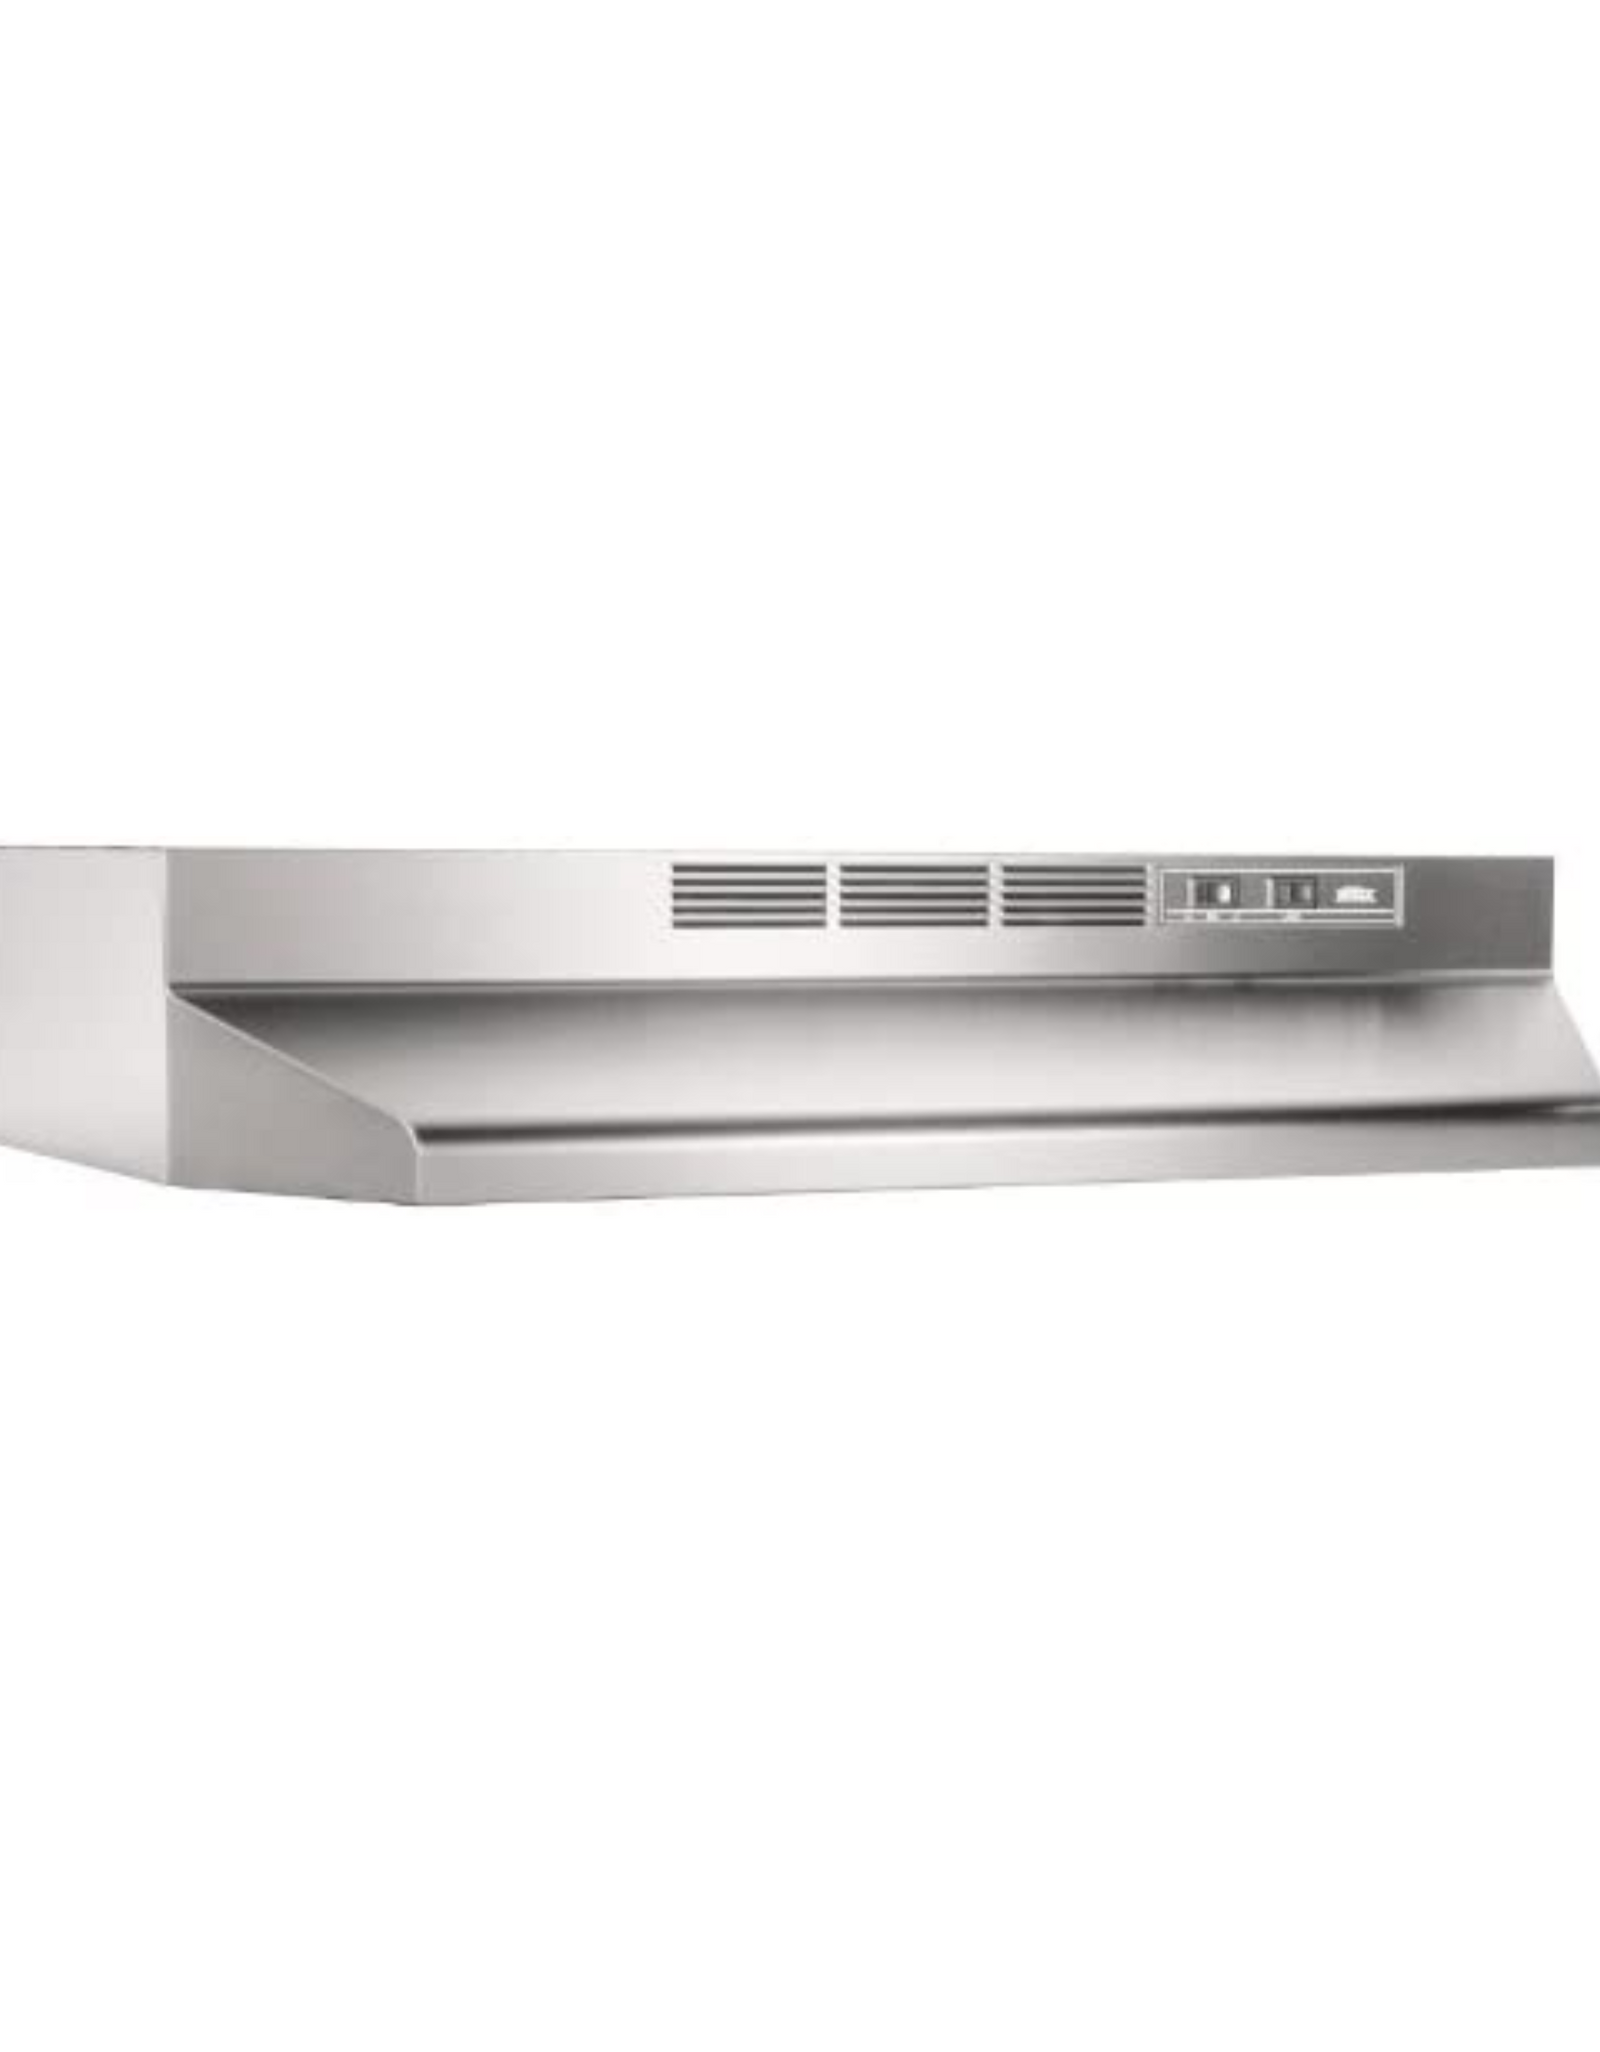 Broan-NuTone 412404 Non-Ducted Ductless Range Hood Insert, 24", Stainless Steel